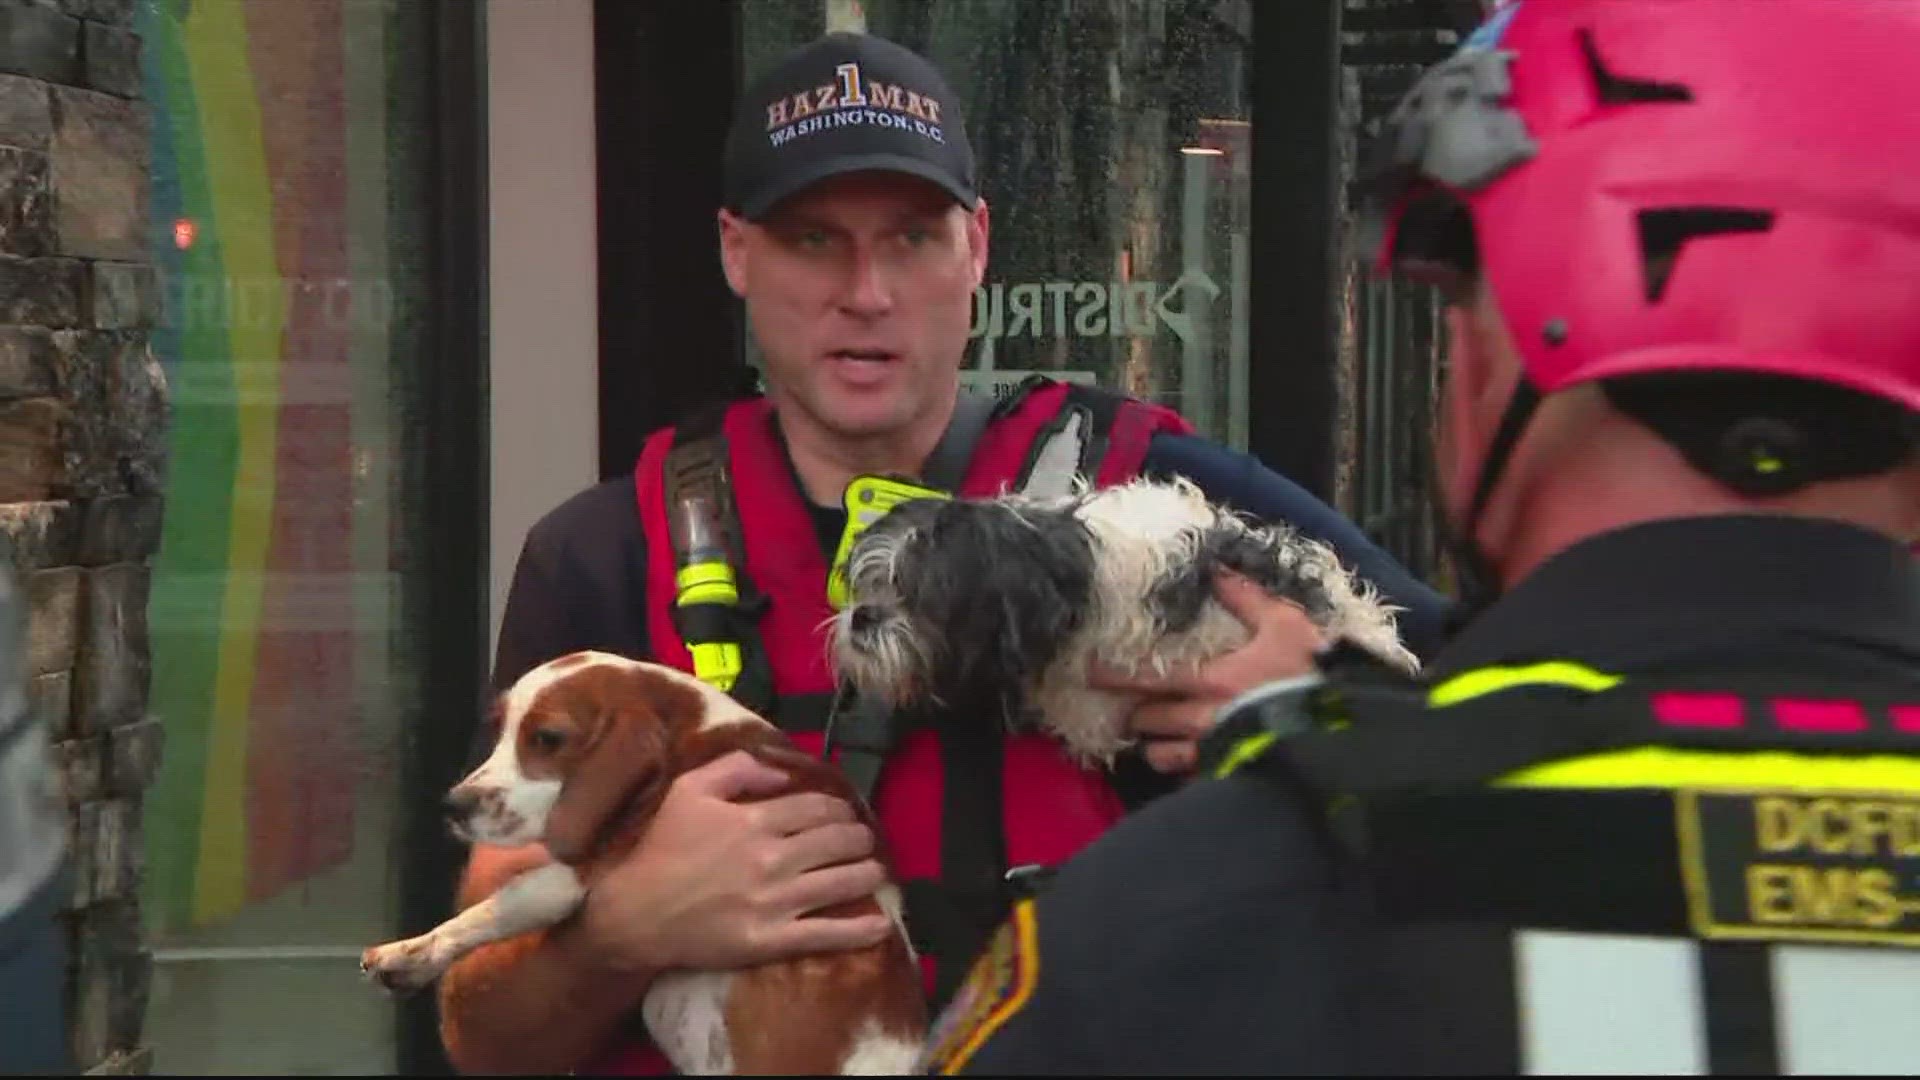 District officials have launched an investigation into a Northeast flood that killed several dogs inside a canine care center on Rhode Island Avenue Northeast.